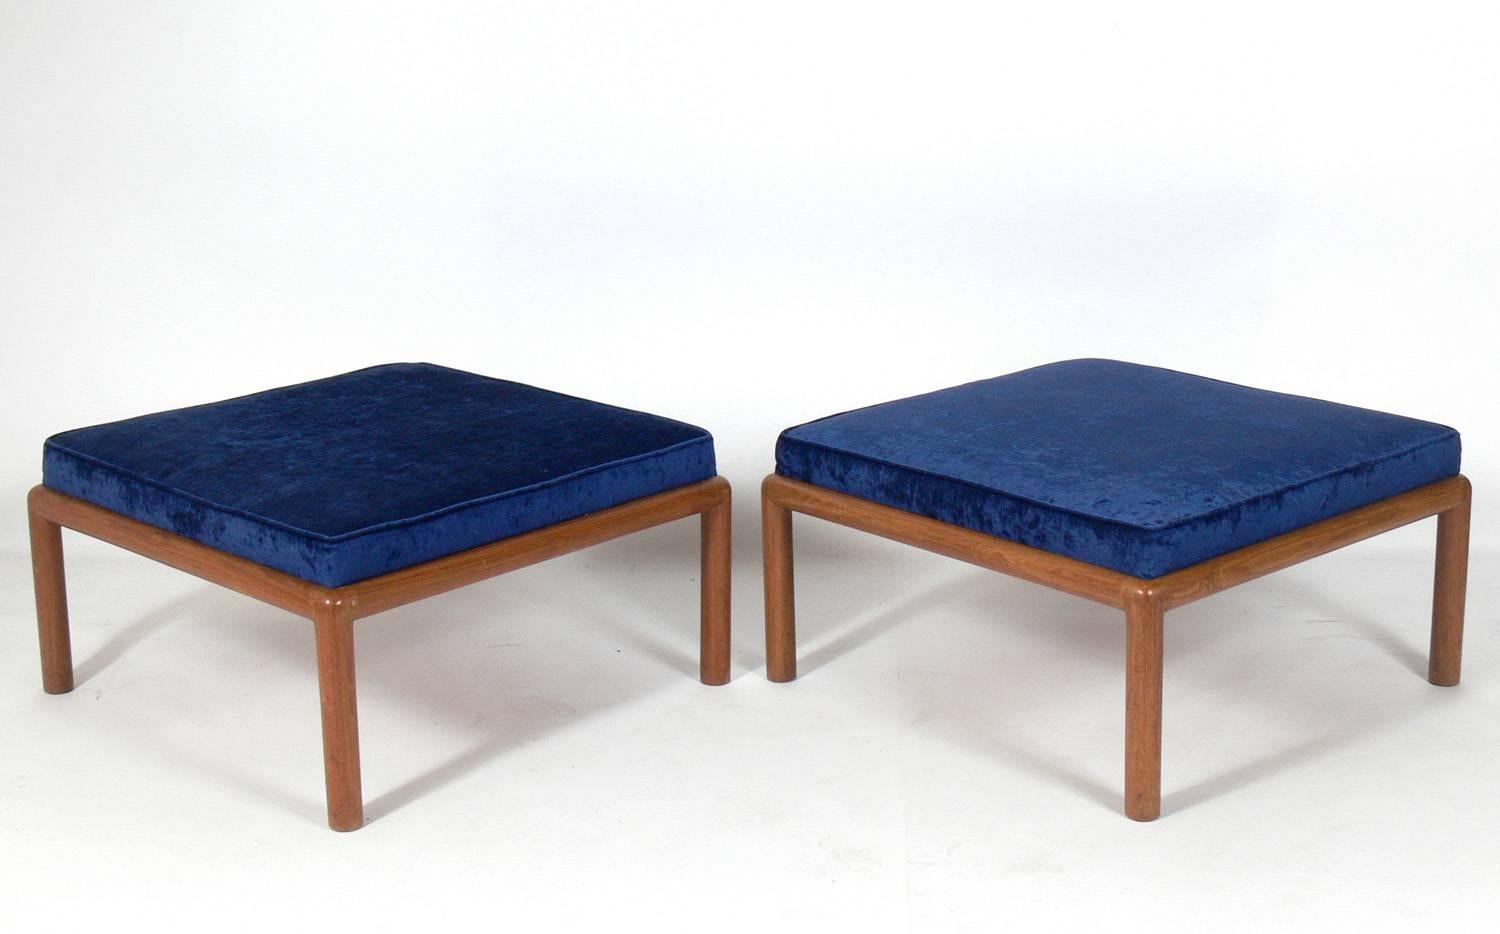 Pair of ottomans, stools or benches, attributed to T.H. Robsjohn-Gibbings, American, circa 1950s. They have been reupholstered in a velvety indigo blue fabric.
 